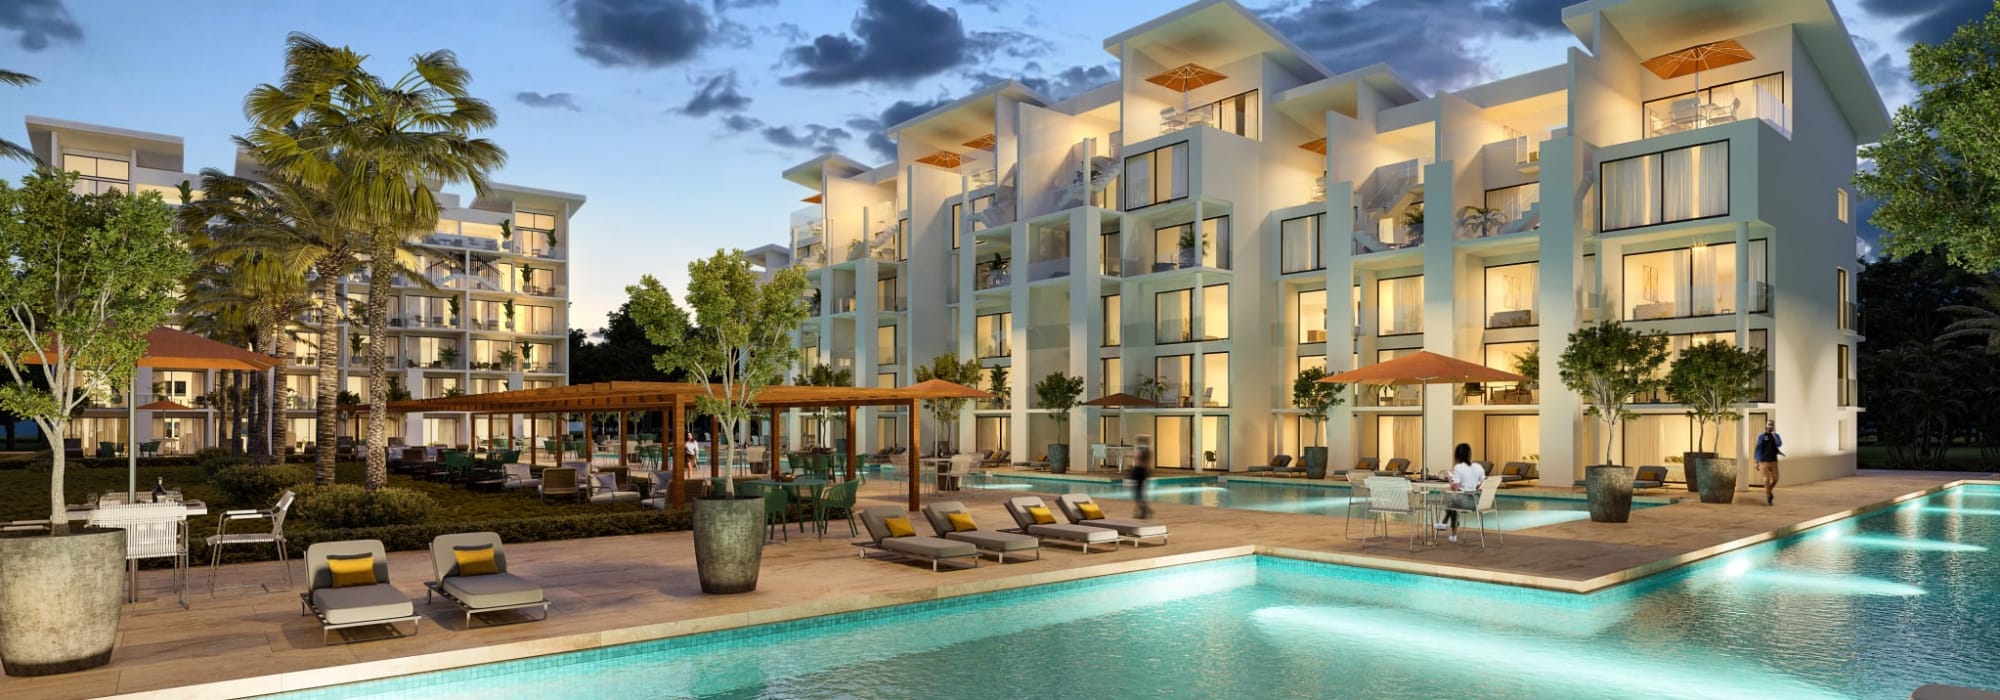 Apartments in Cana Bay